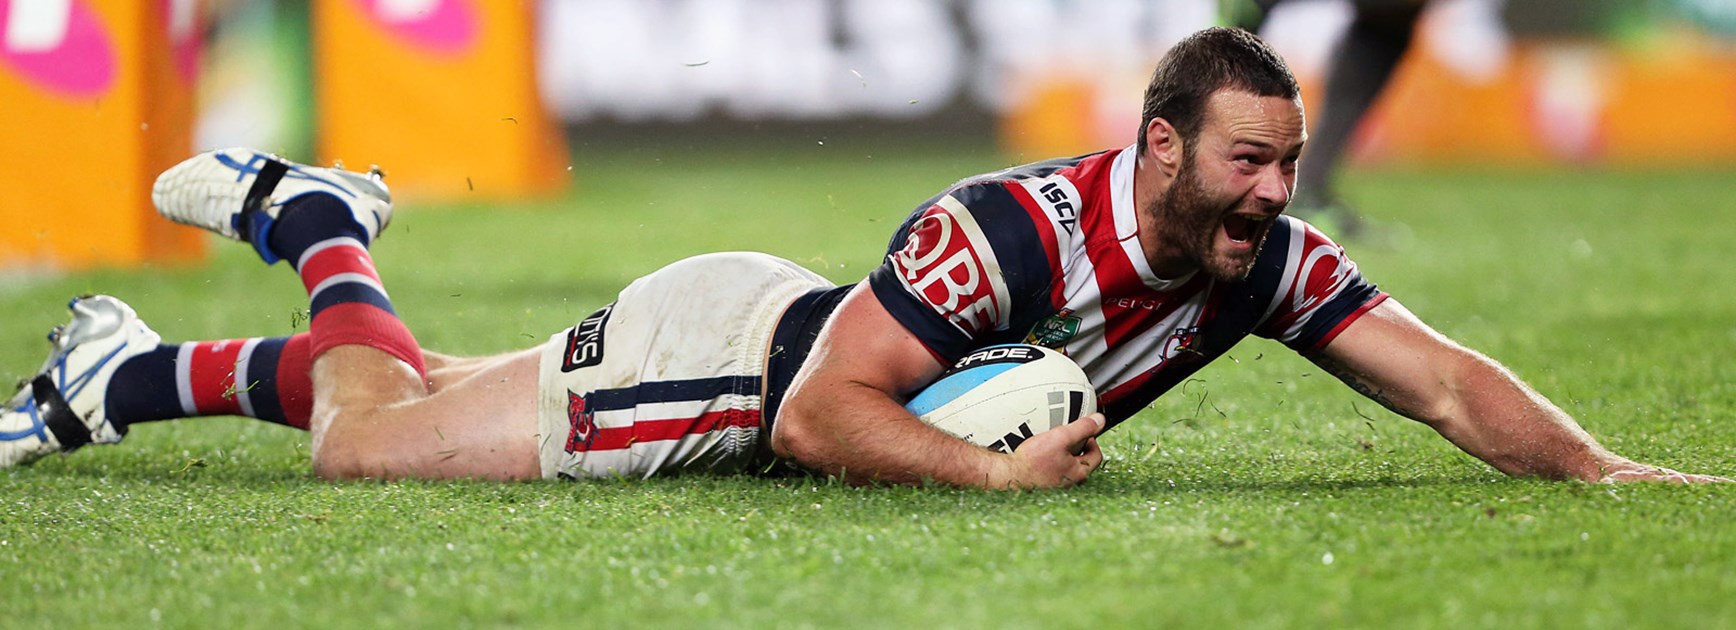 Boyd Cordner crossed for a try against the Bulldogs in their semi-final clash.